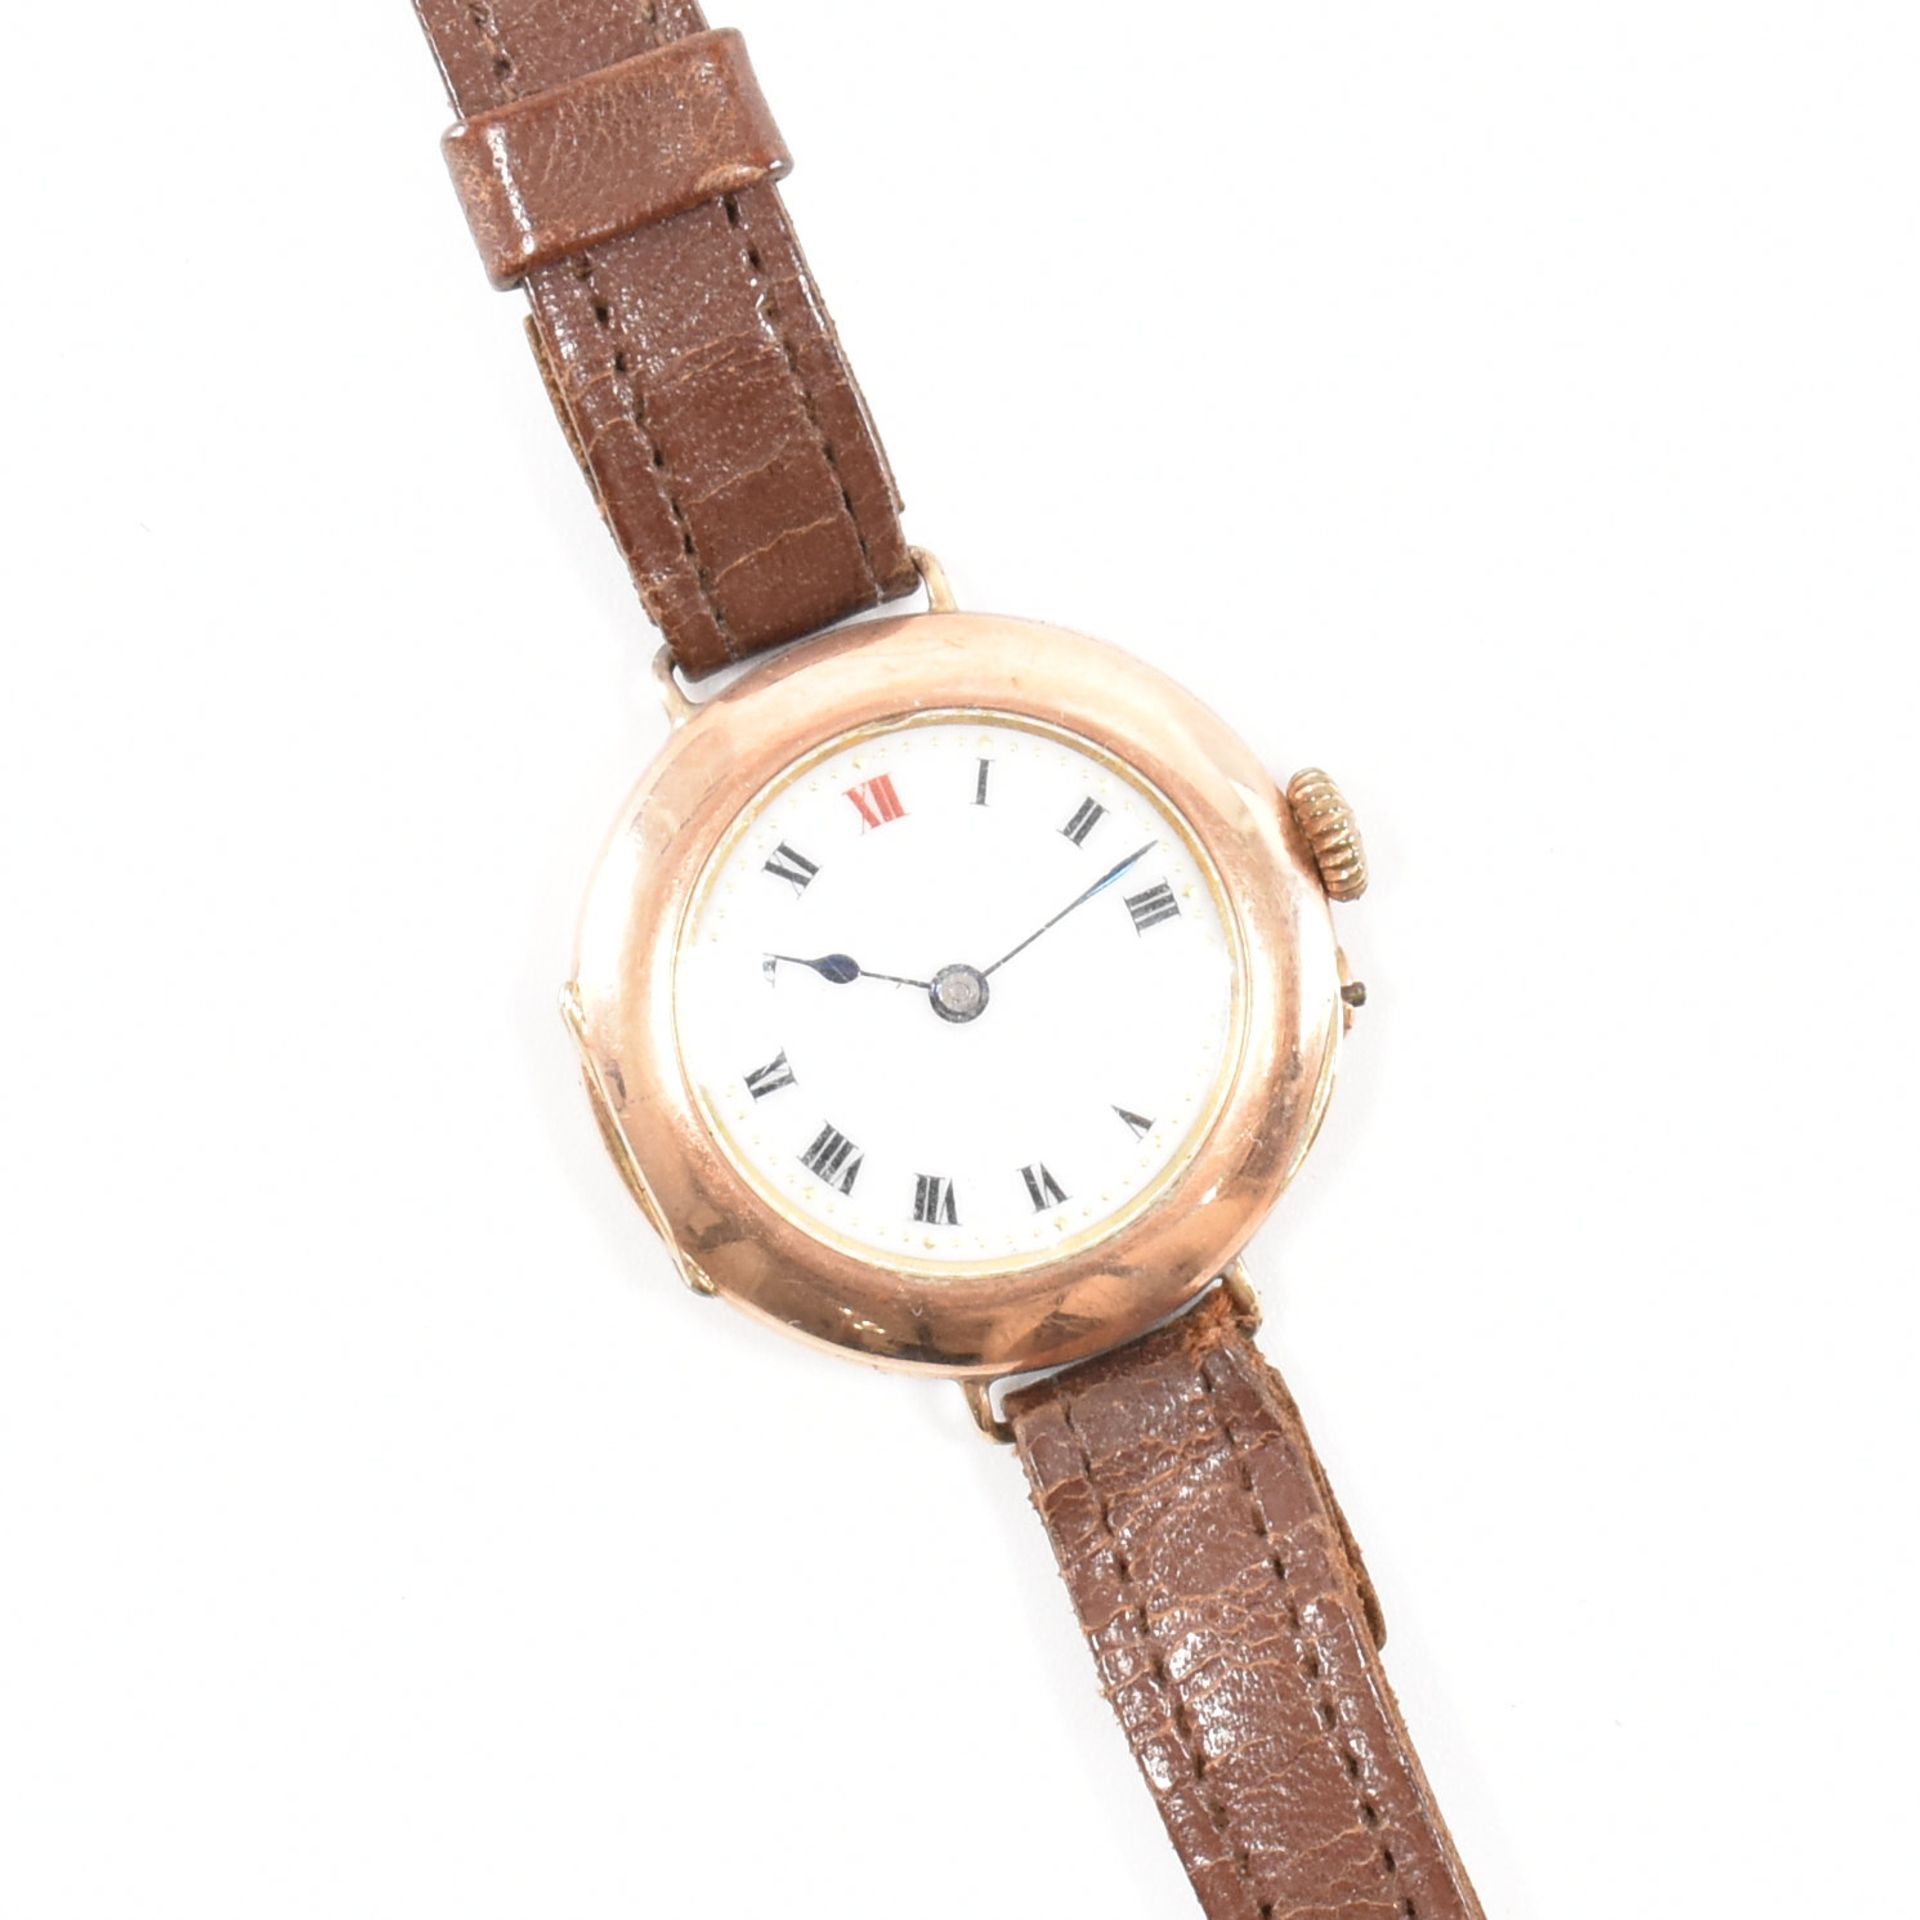 HALLMARKED 9CT GOLD EARLY 20TH CENTURY WATCH